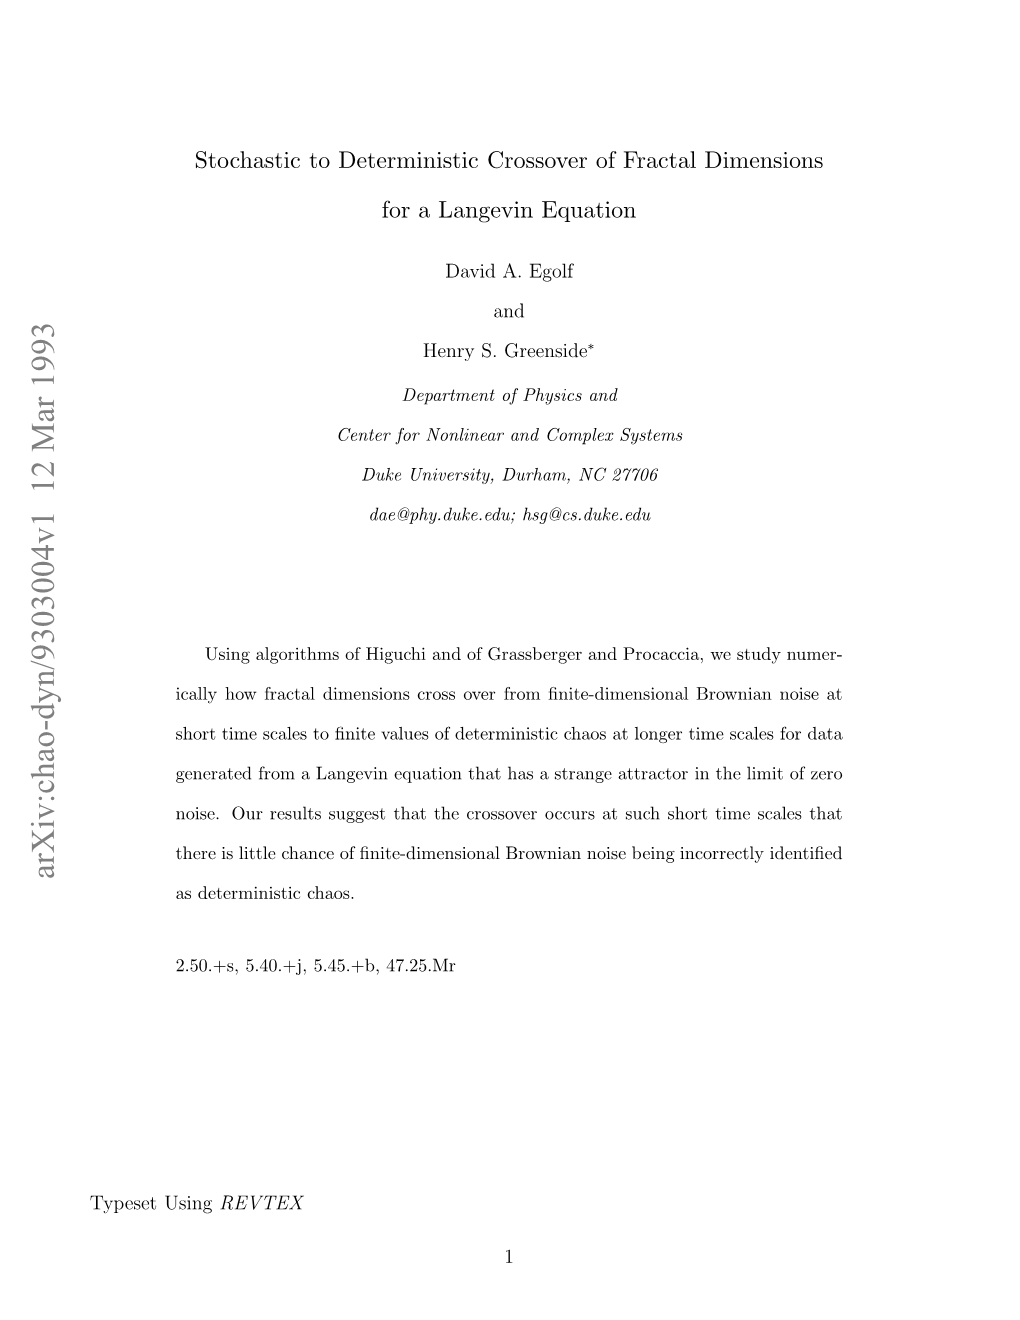 Stochastic to Deterministic Crossover of Fractal Dimension for a Langevin